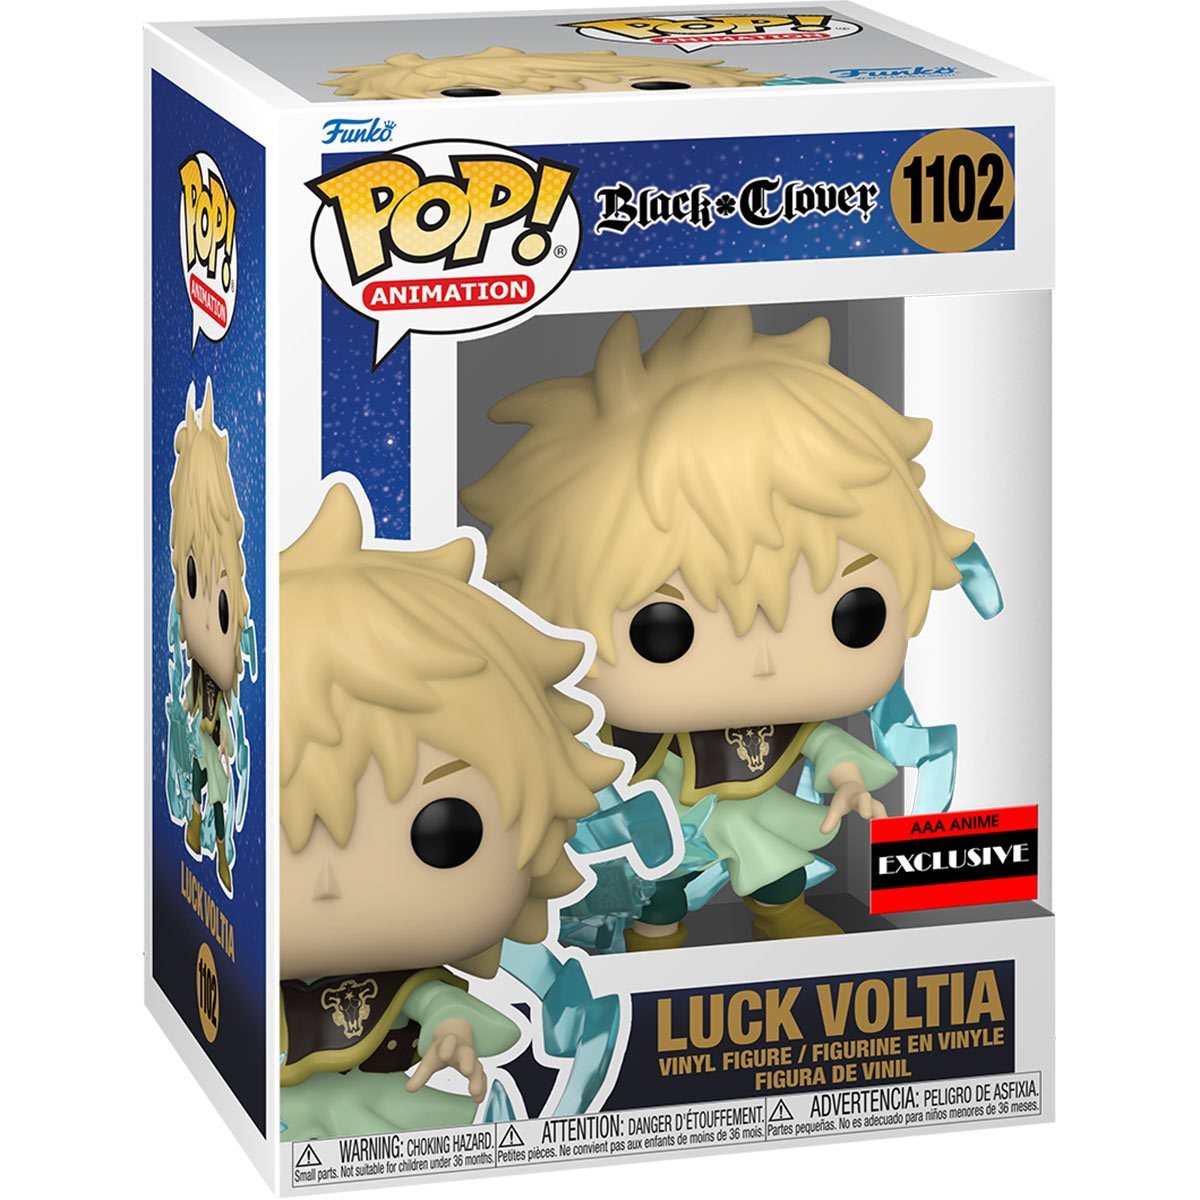 Funko - Pop! Black Clover Luck Voltia AAA Exclusive #1102 - Good Game Anime